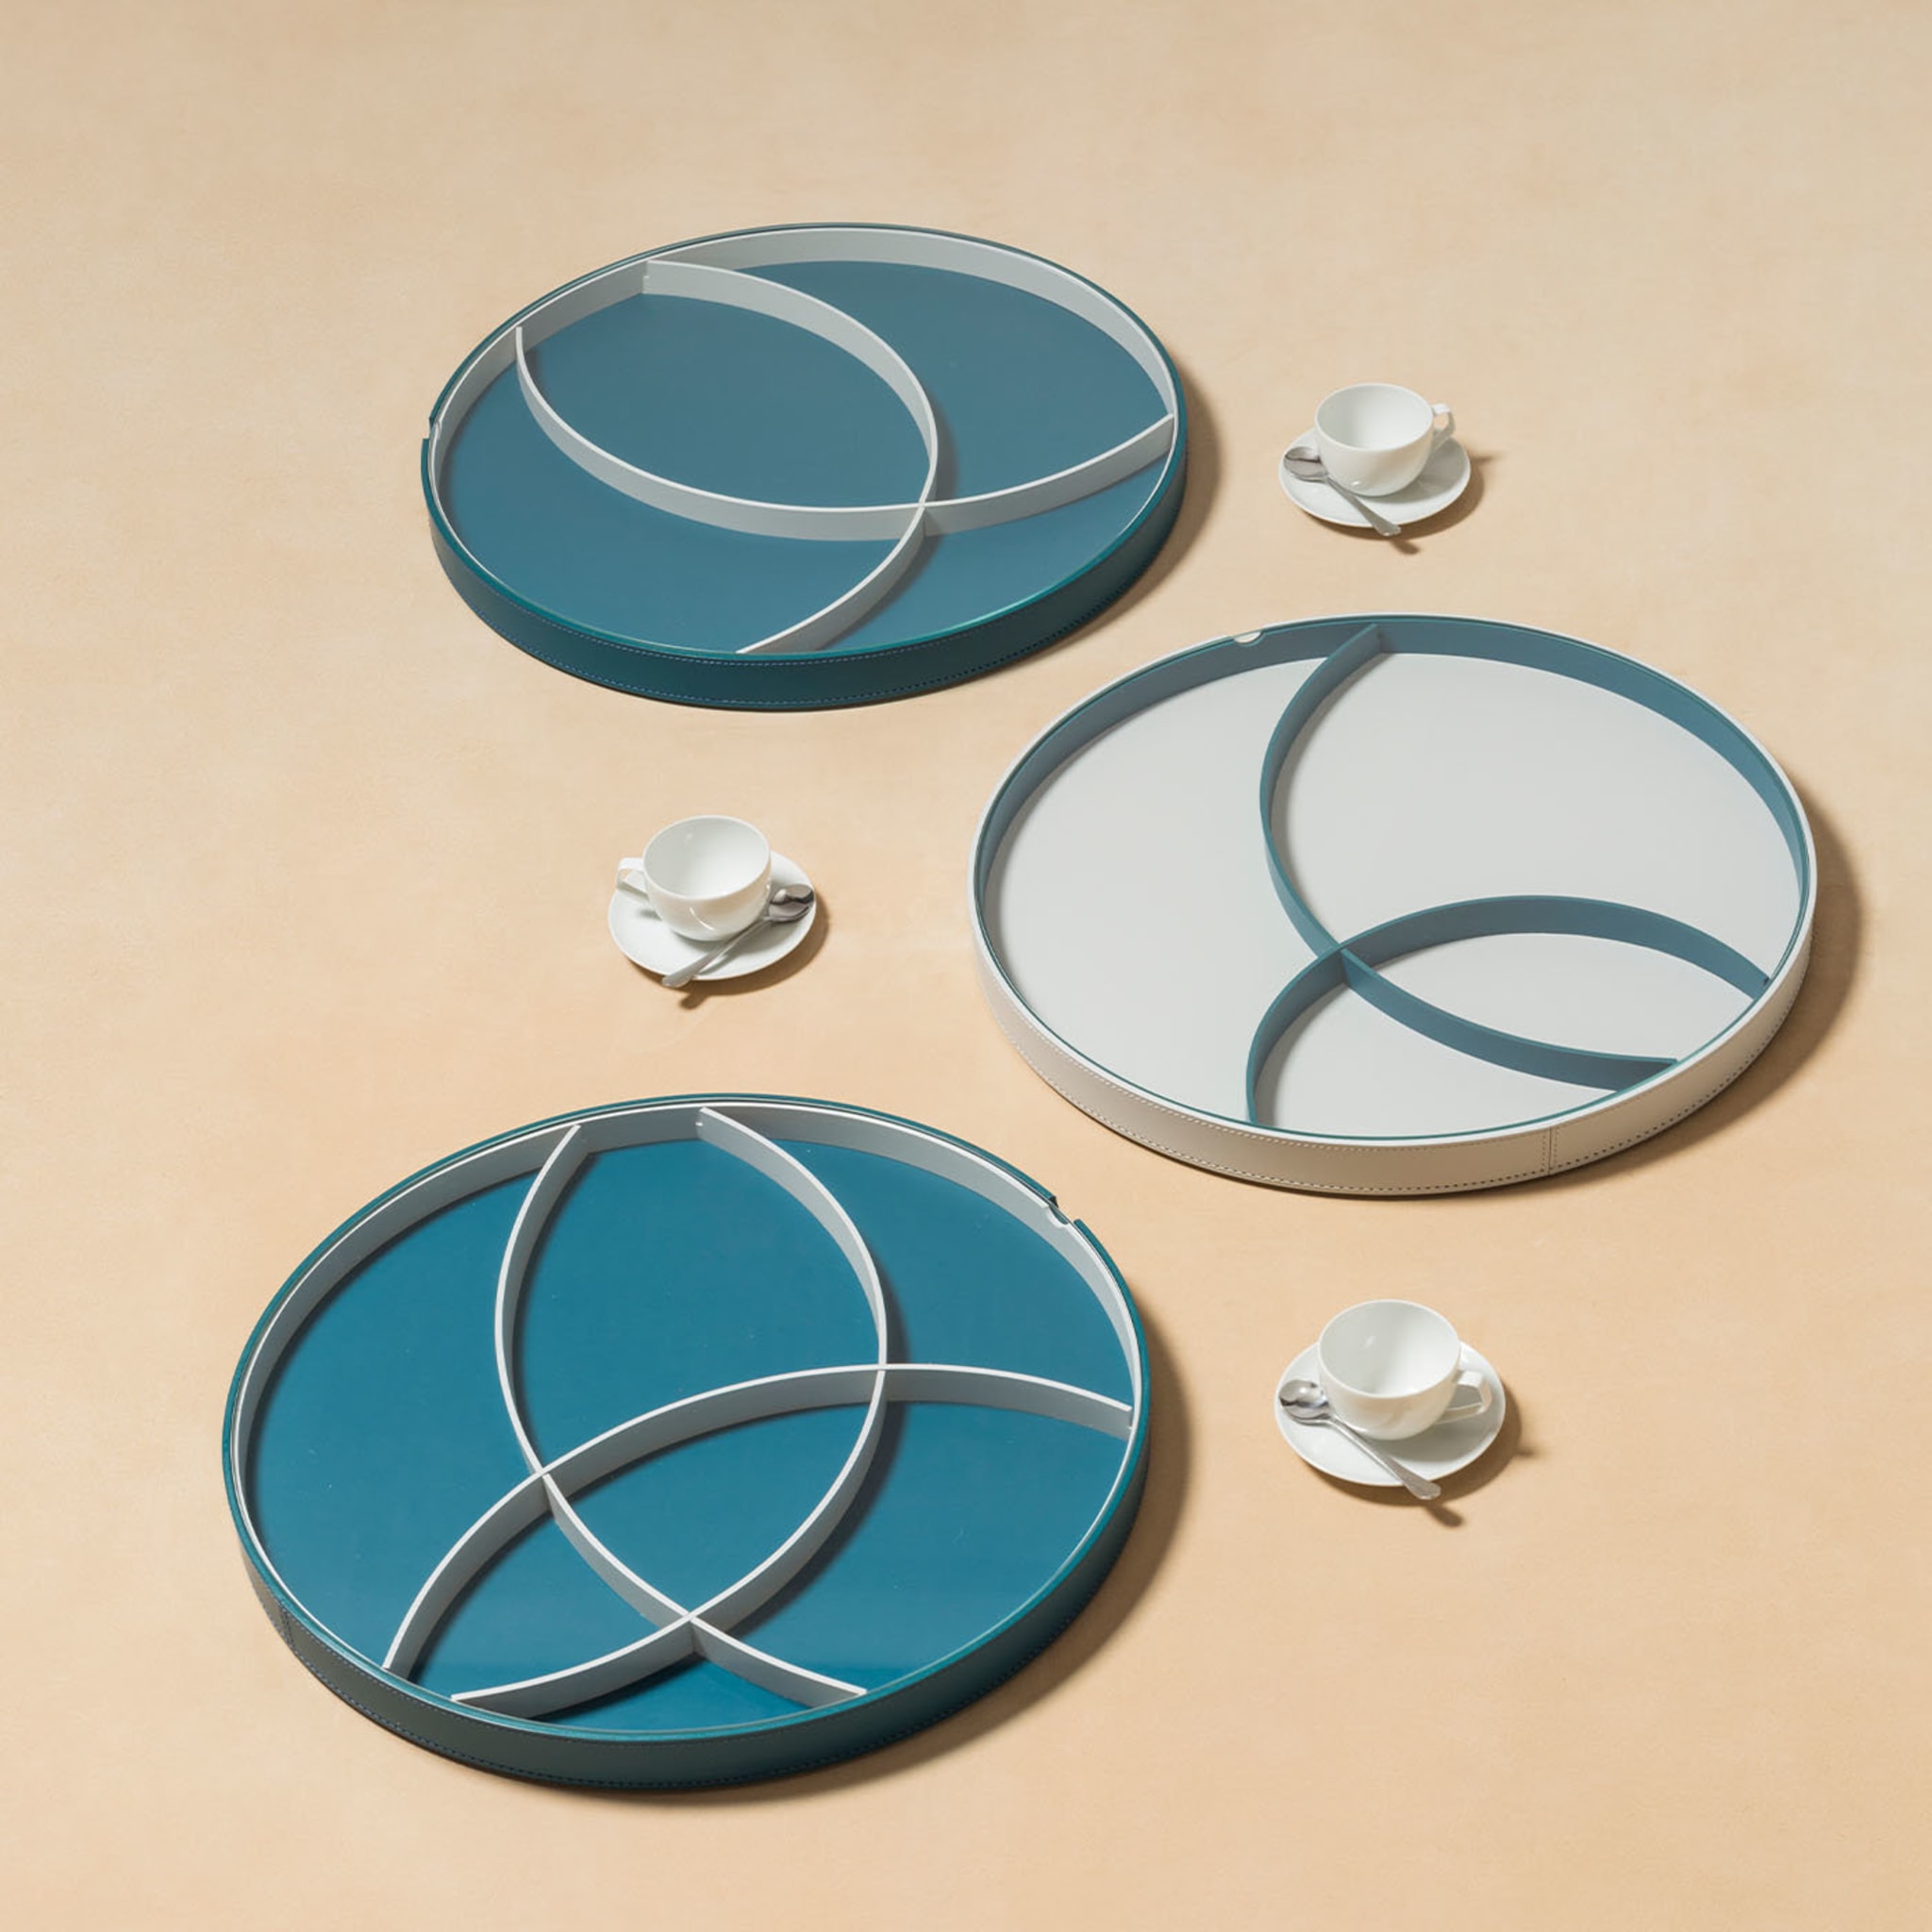 Orbit Petrol Blue Round Tray N. 3 with Dividers - Alternative view 1